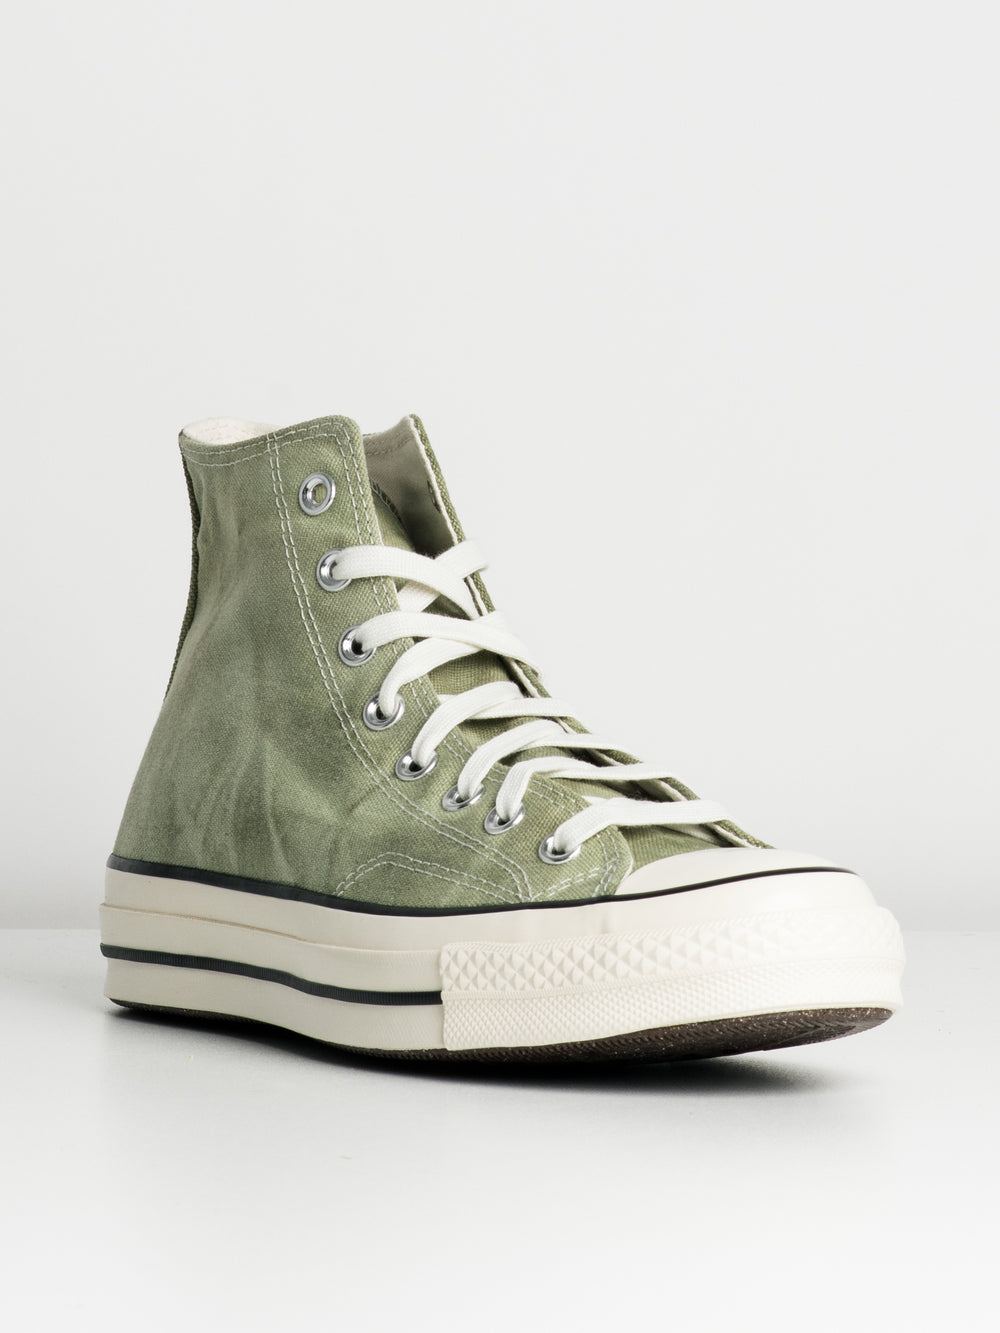 MENS CONVERSE CHUCK 70 WASHED CANVAS - CLEARANCE